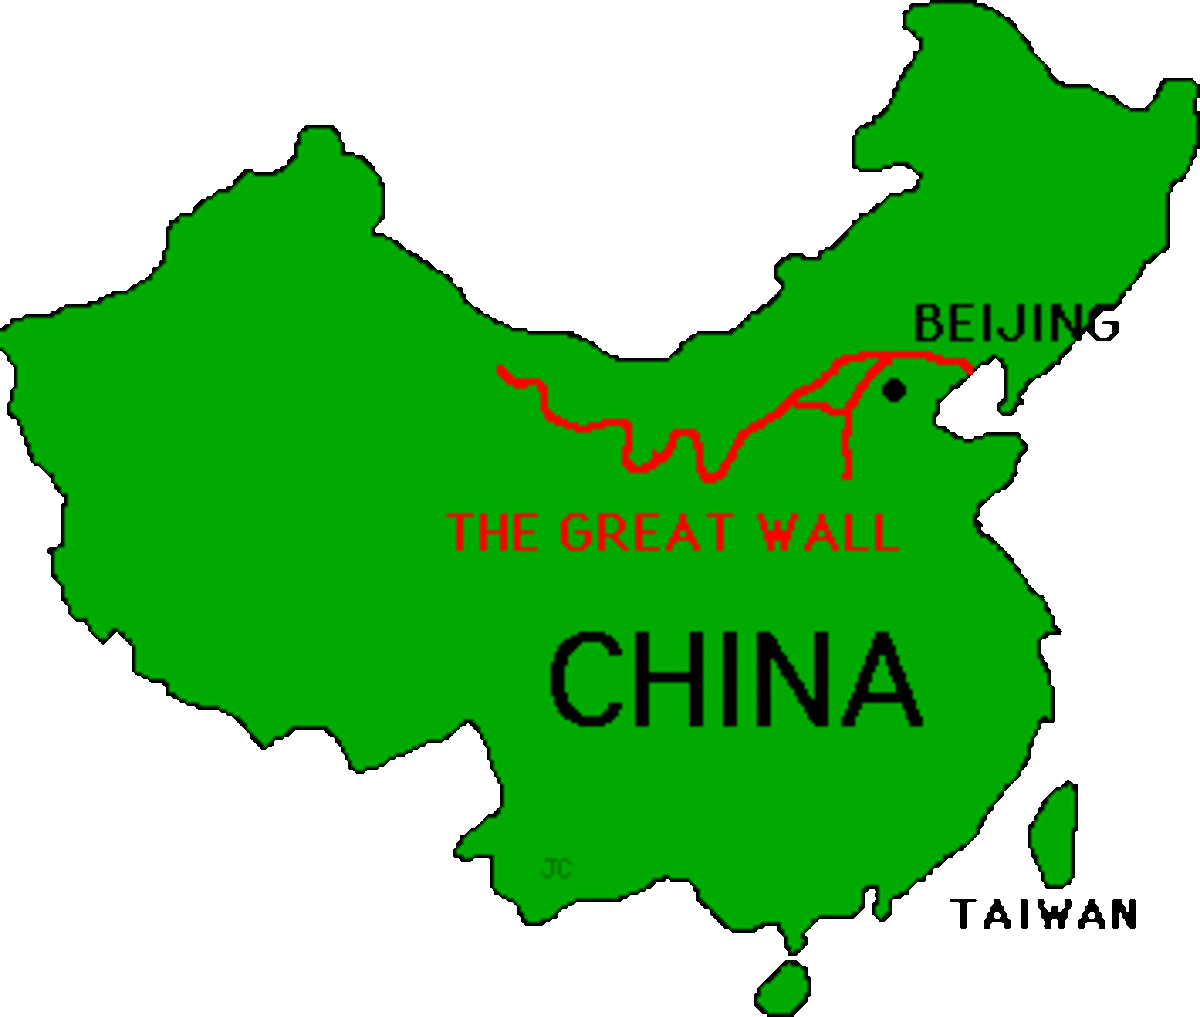 The red outlines the Great Wall of China. 